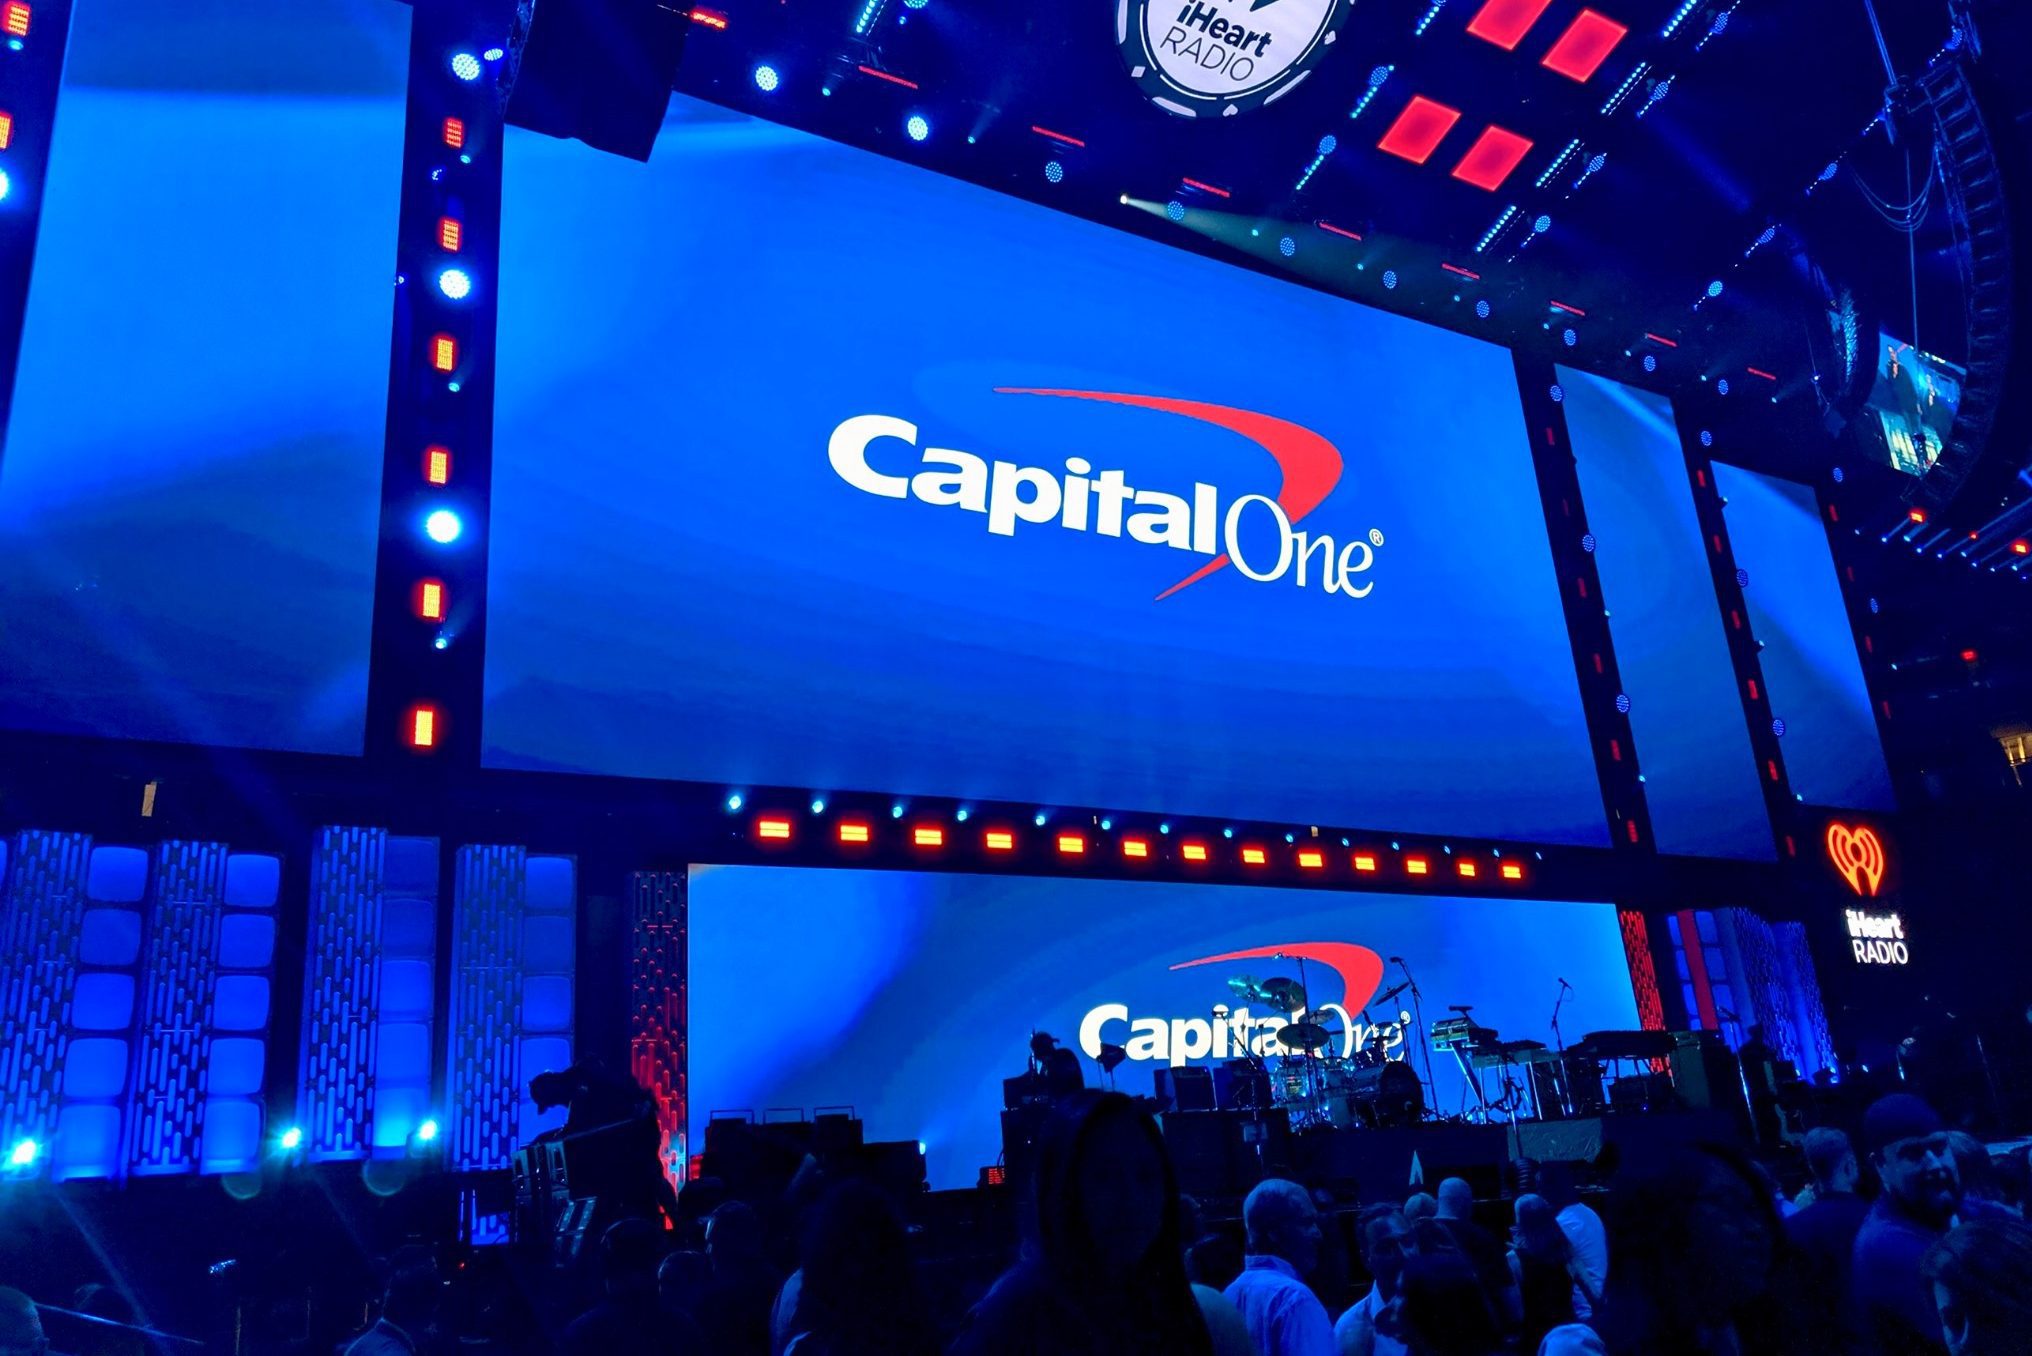 capital one and travel